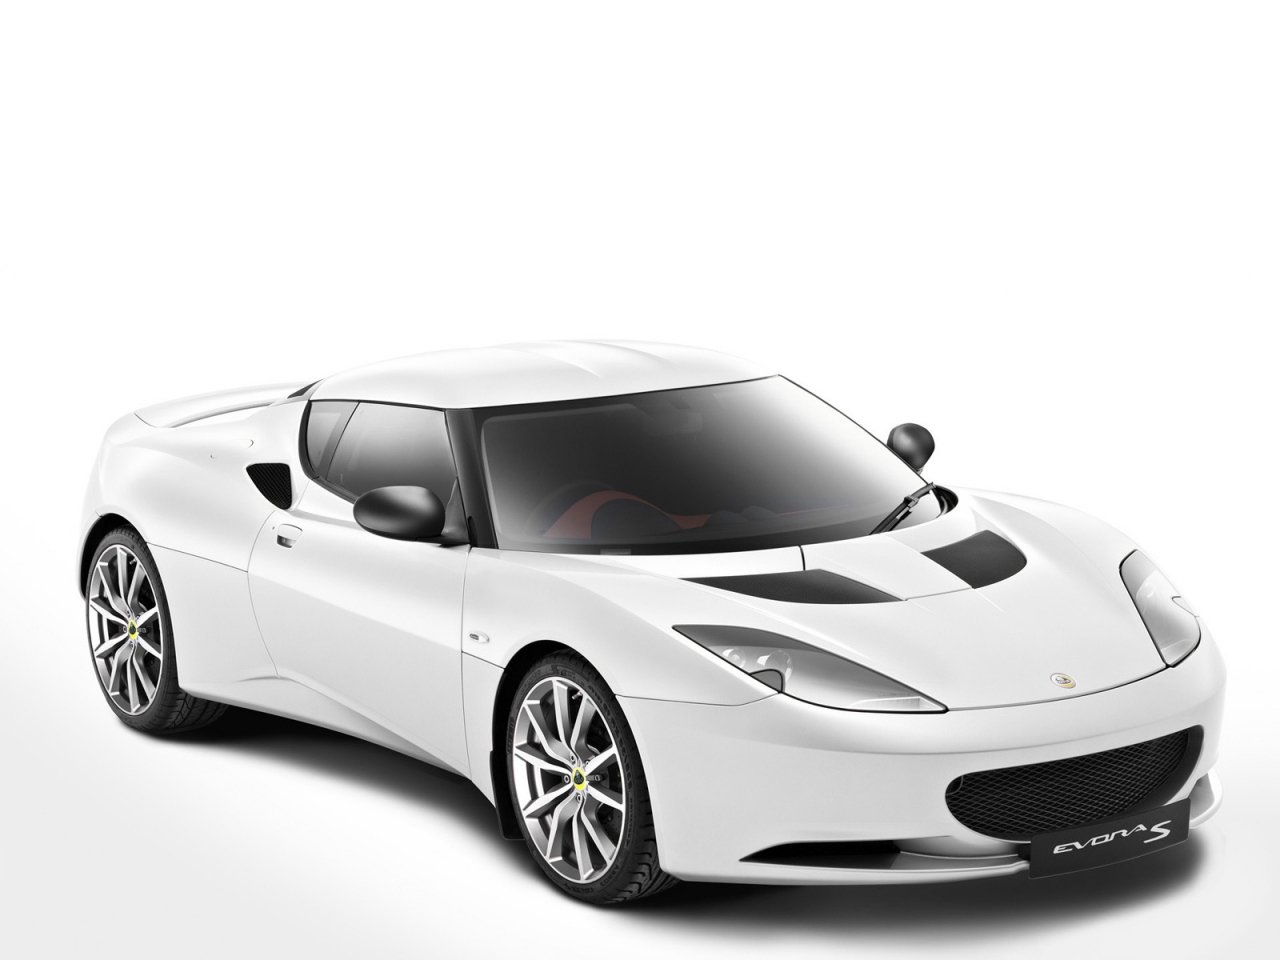 Lotus Evora S 2011 Front Angle for 1280 x 960 resolution